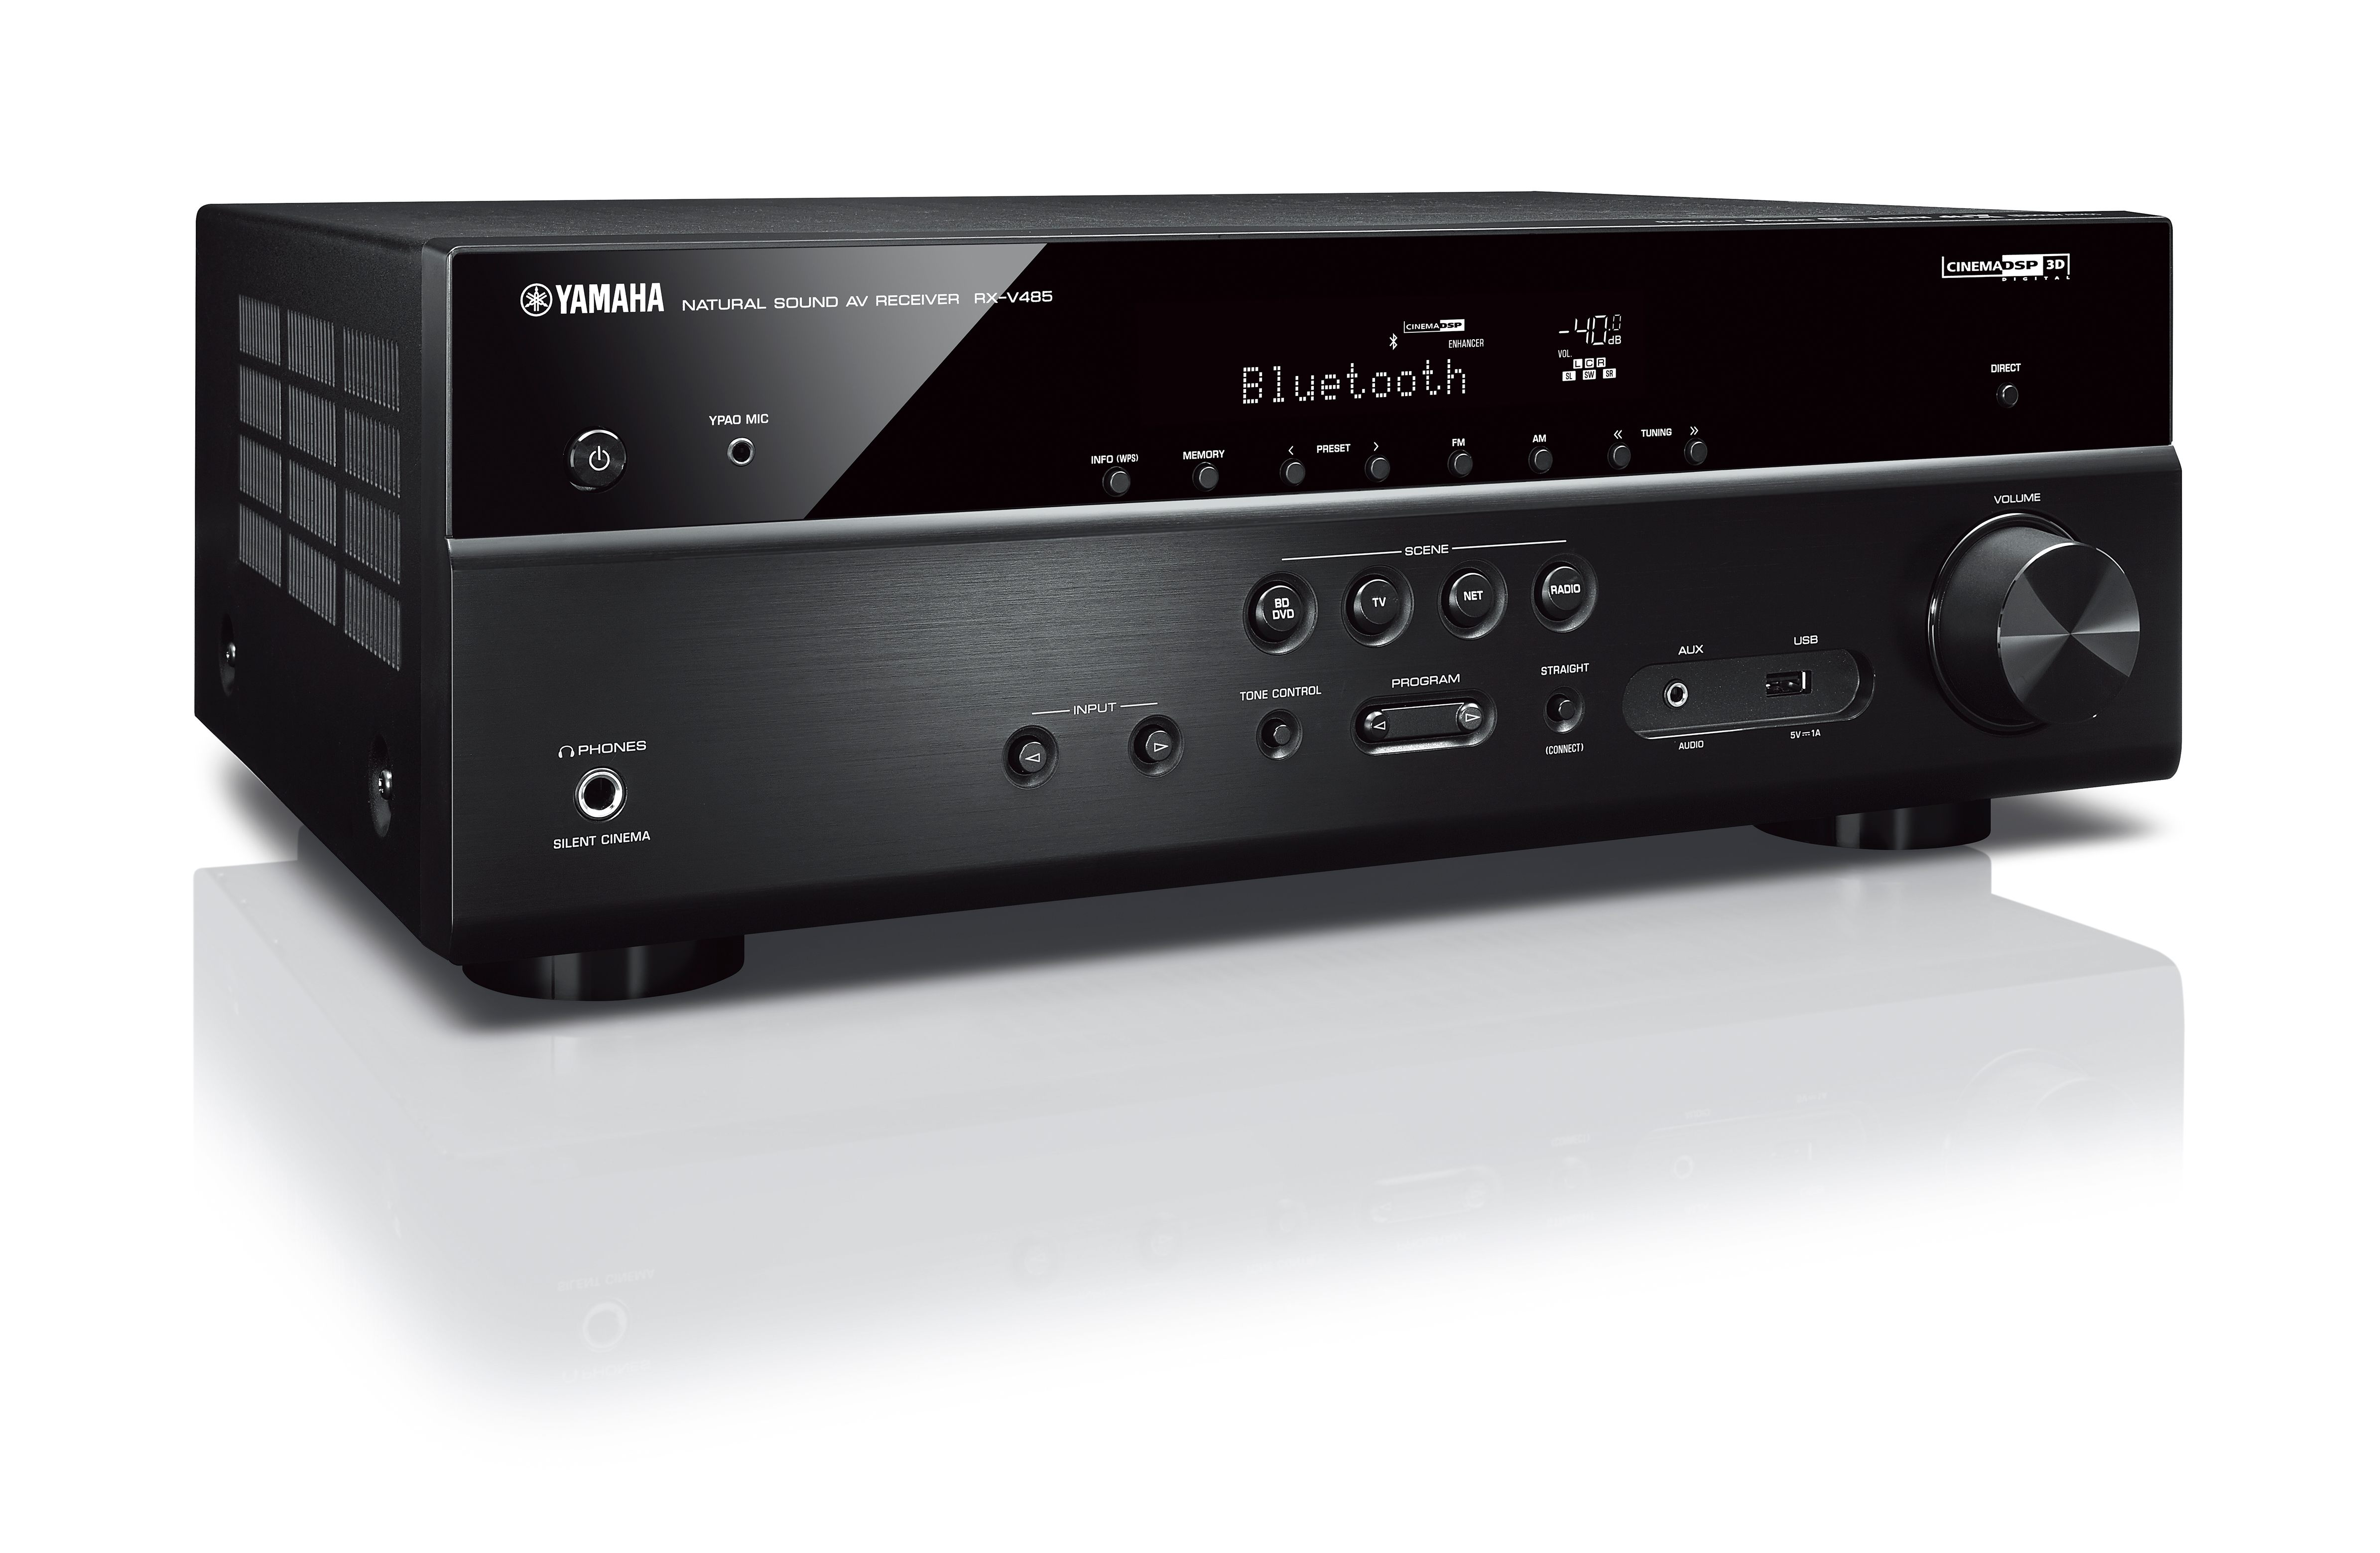 vredig Wat dan ook monster RX-V485 - Overview - AV Receivers - Audio & Visual - Products - Yamaha USA